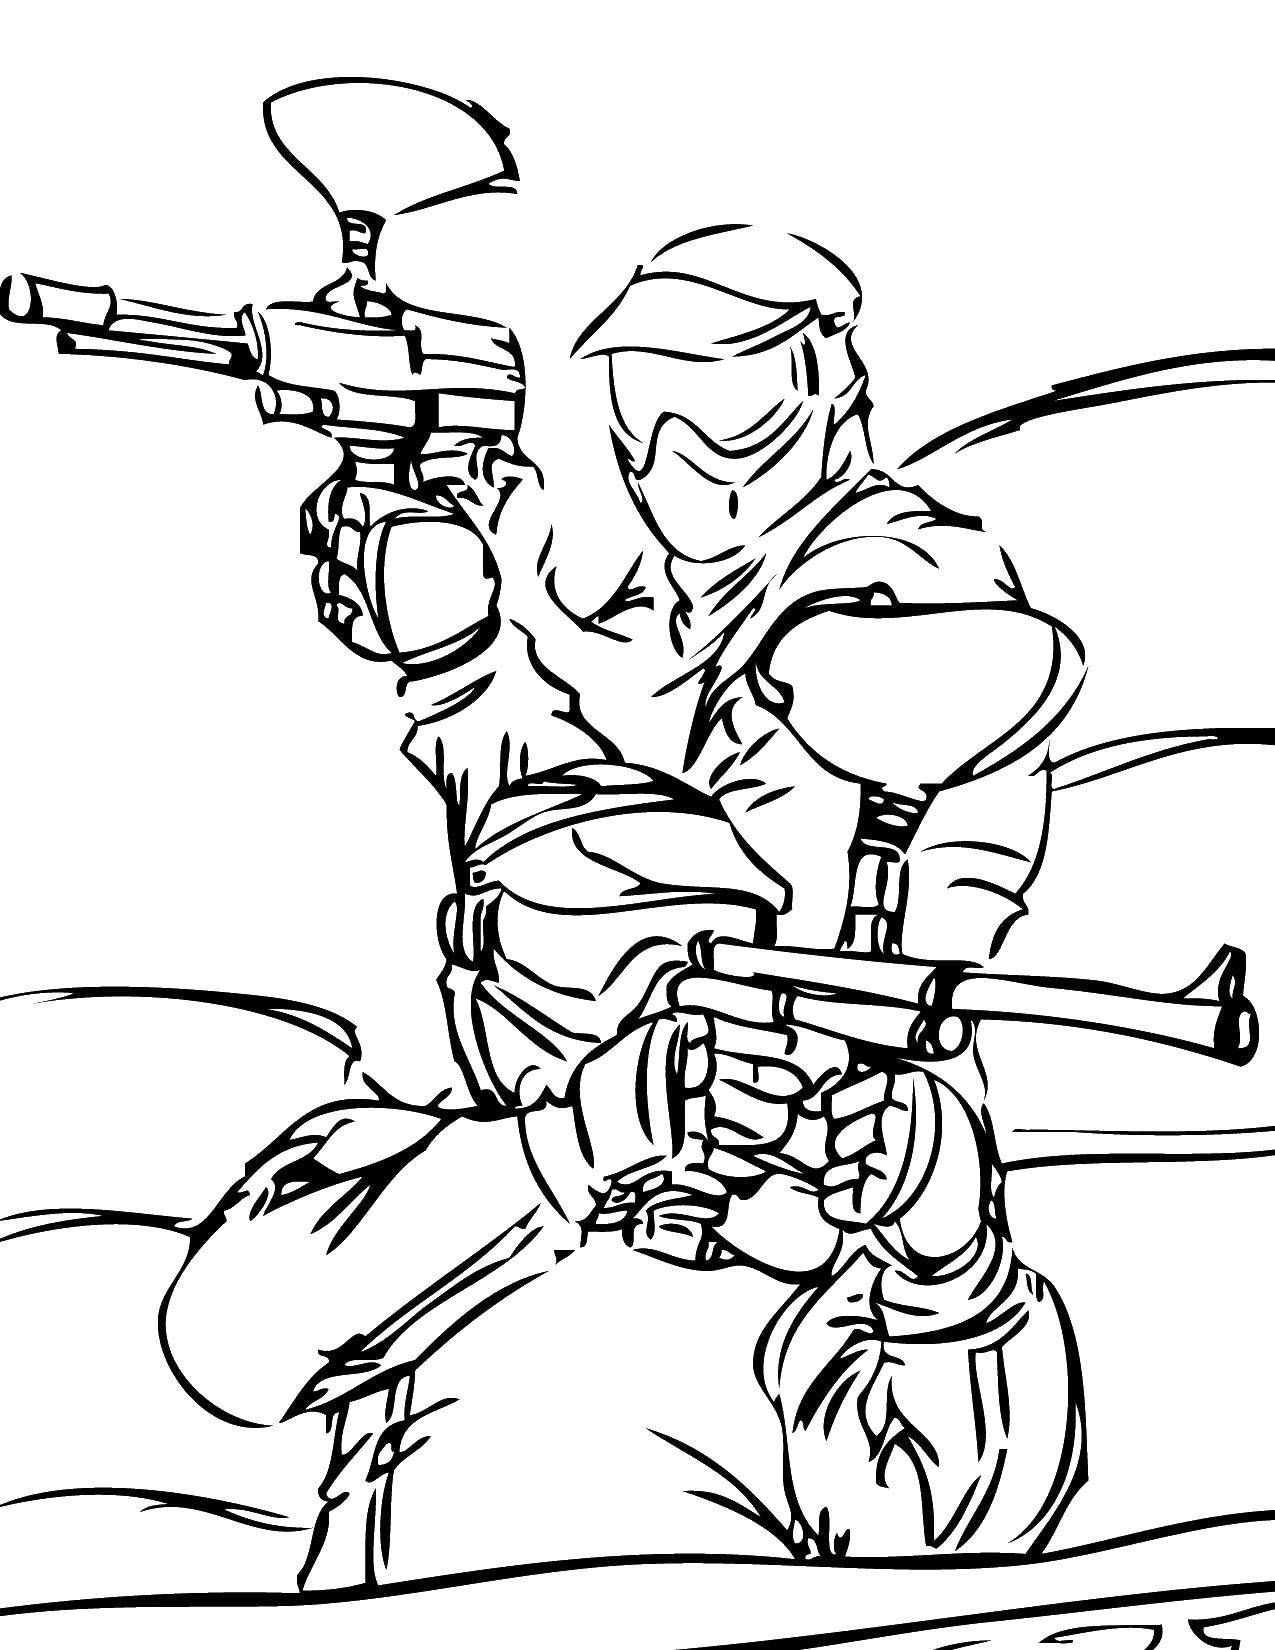 Online coloring pages Coloring page Paintball sport, Download print coloring  page.